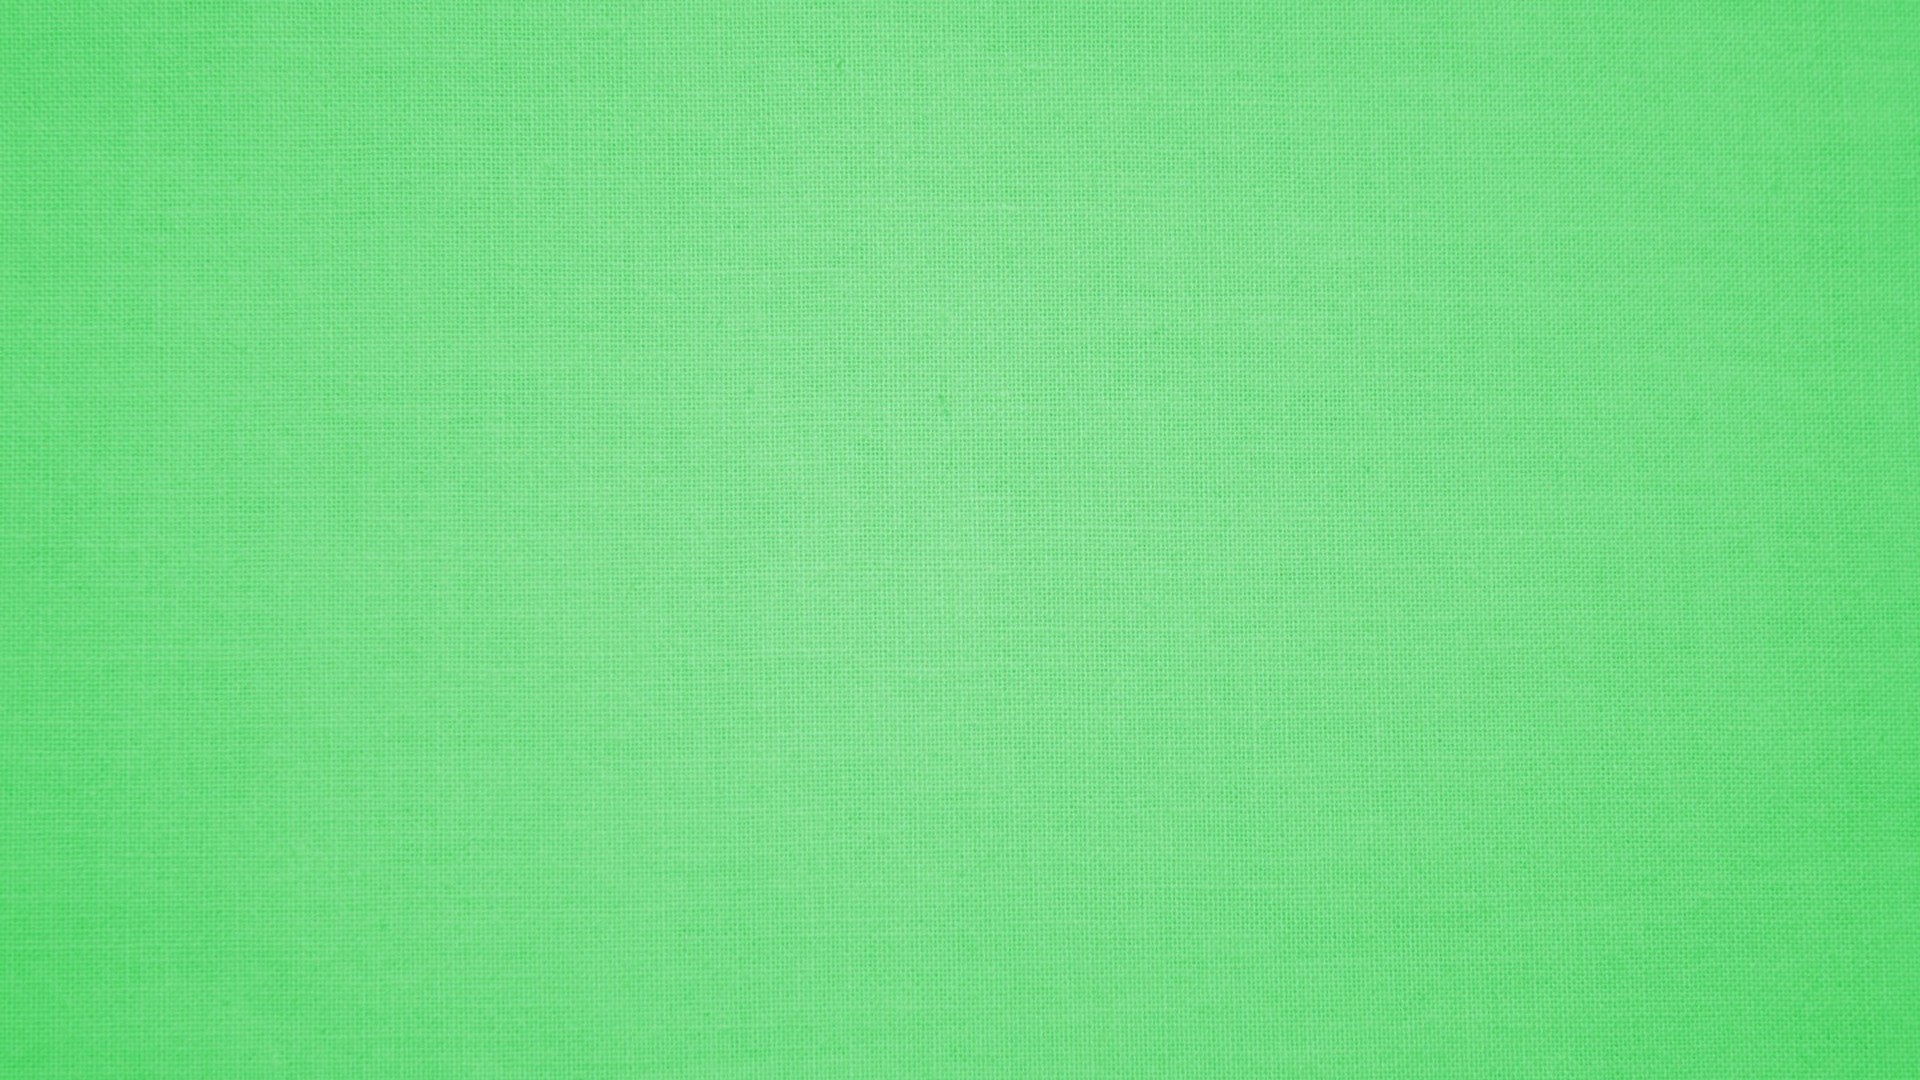 Wallpaper HD Green Colour With Resolution 1920X1080 pixel. You can make this wallpaper for your Desktop Computer Backgrounds, Mac Wallpapers, Android Lock screen or iPhone Screensavers